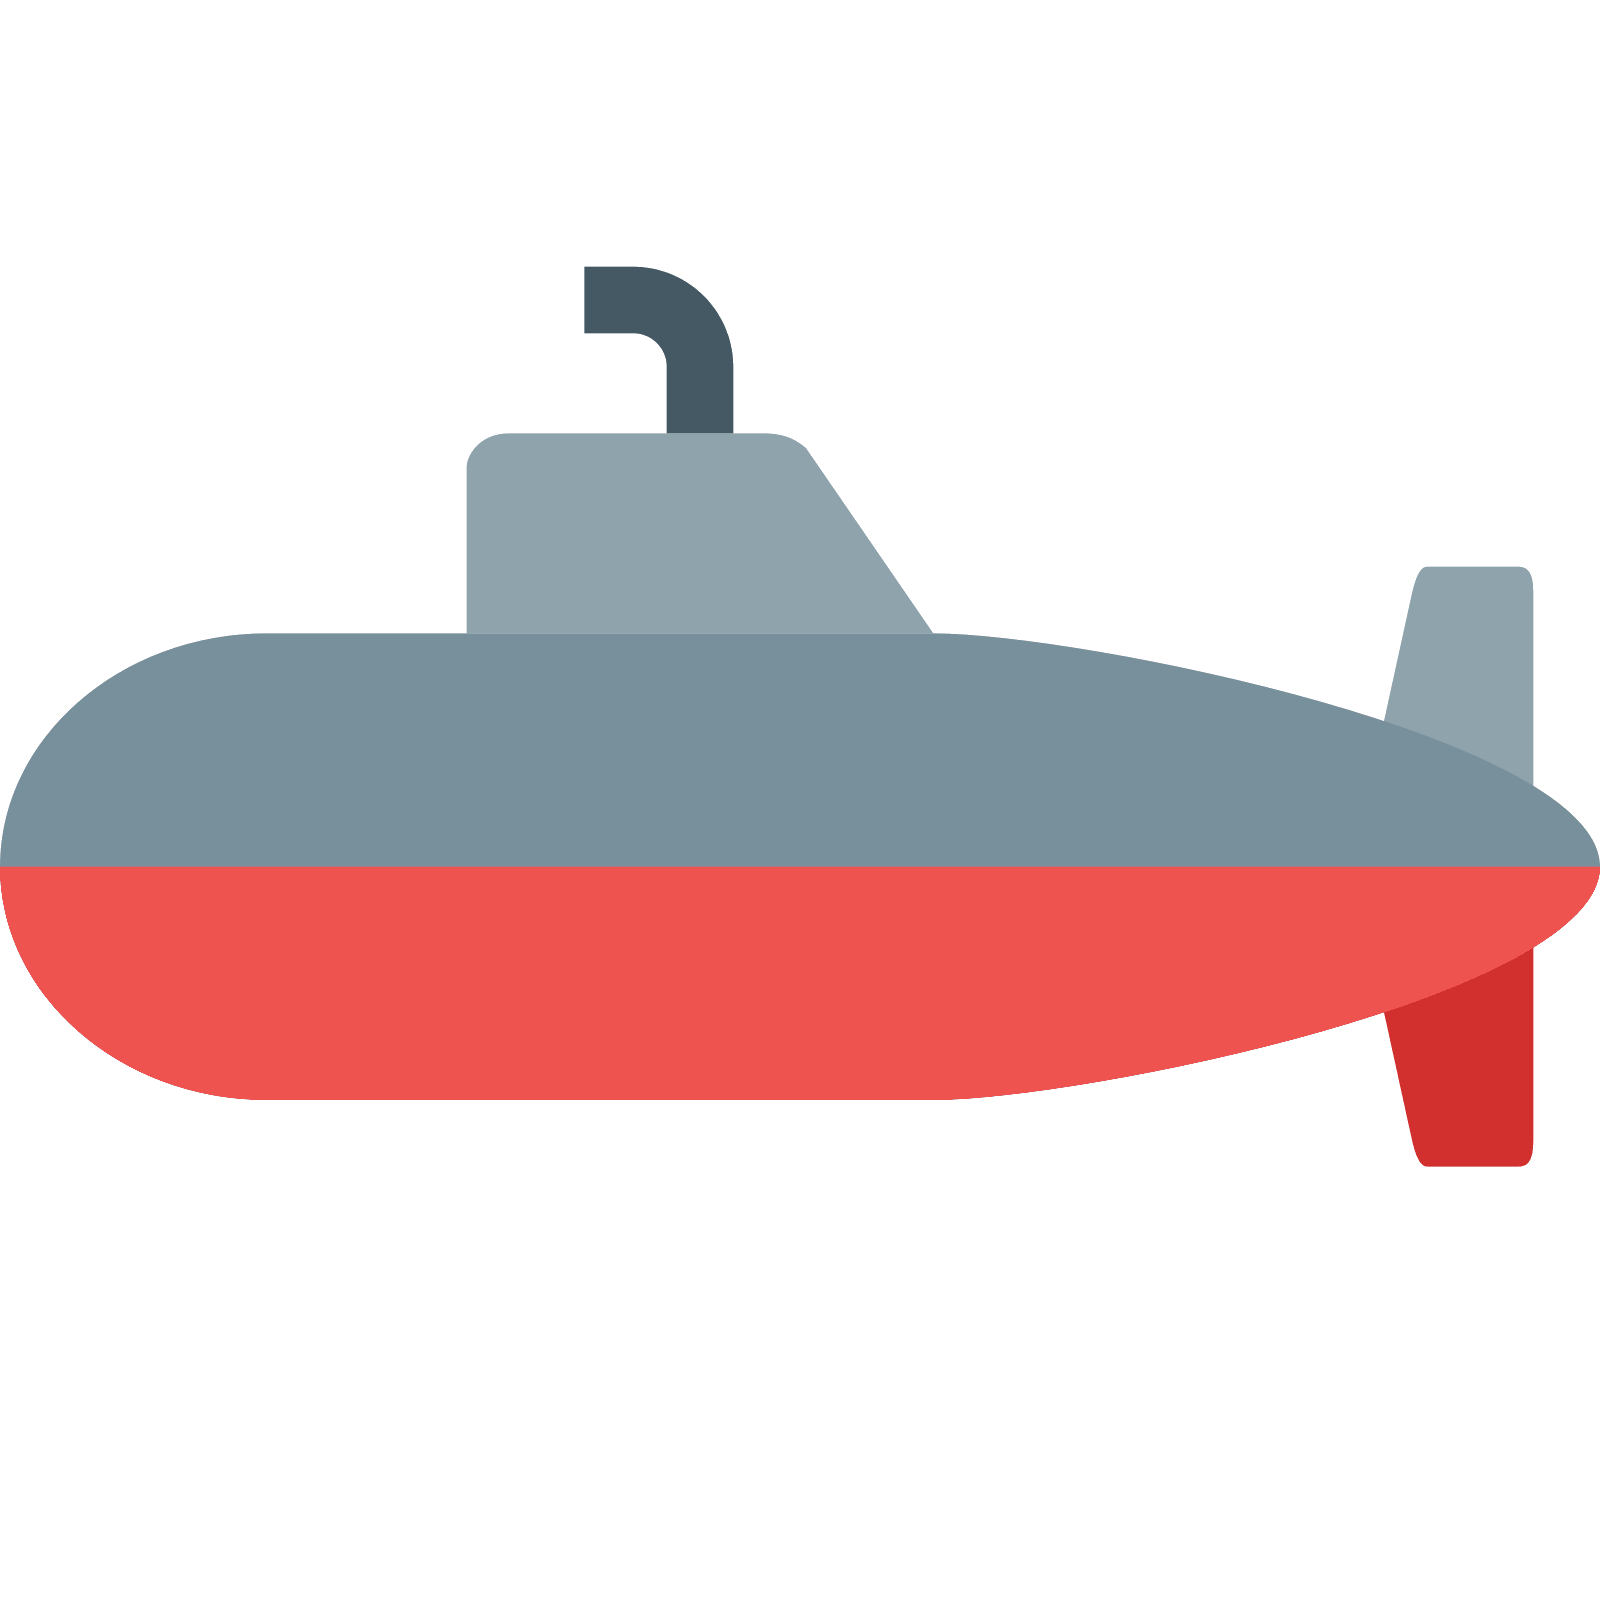 Submarine PNG Image with Transparent Background